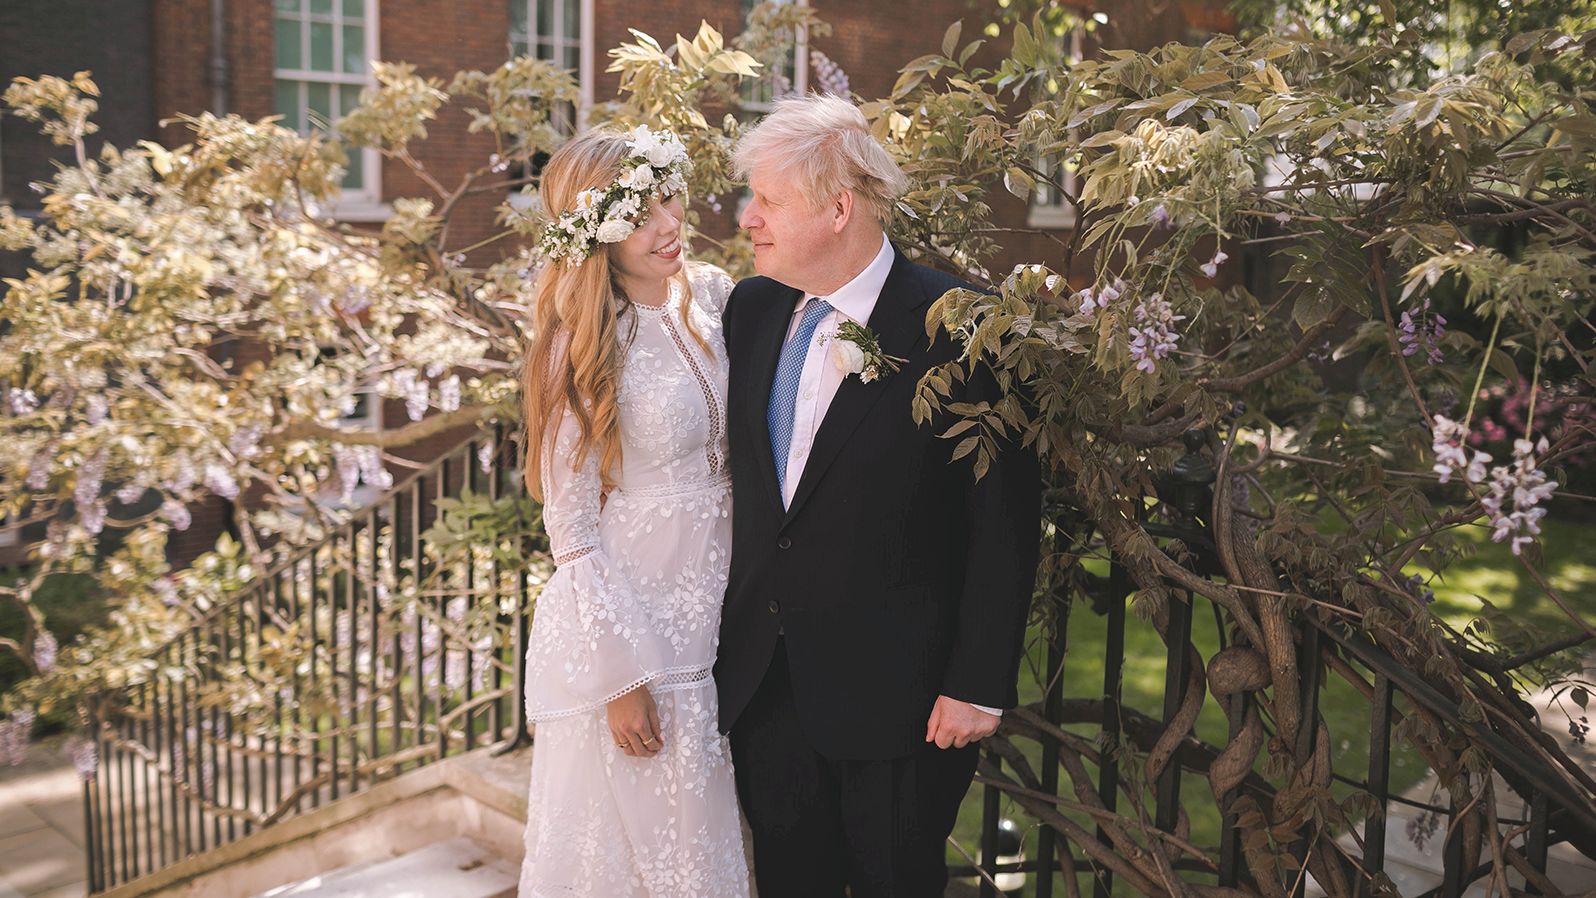 Johnson is seen with his wife, Carrie, after <a href="https://www.cnn.com/2021/05/29/world/boris-johnson-marries-carrie-symonds-intl/index.html" target="_blank">their wedding</a> at London's Westminster Cathedral in May 2021. The ceremony, described by PA Media as a "secret wedding," was reportedly held in front of close friends and family, according to several British newspaper accounts.